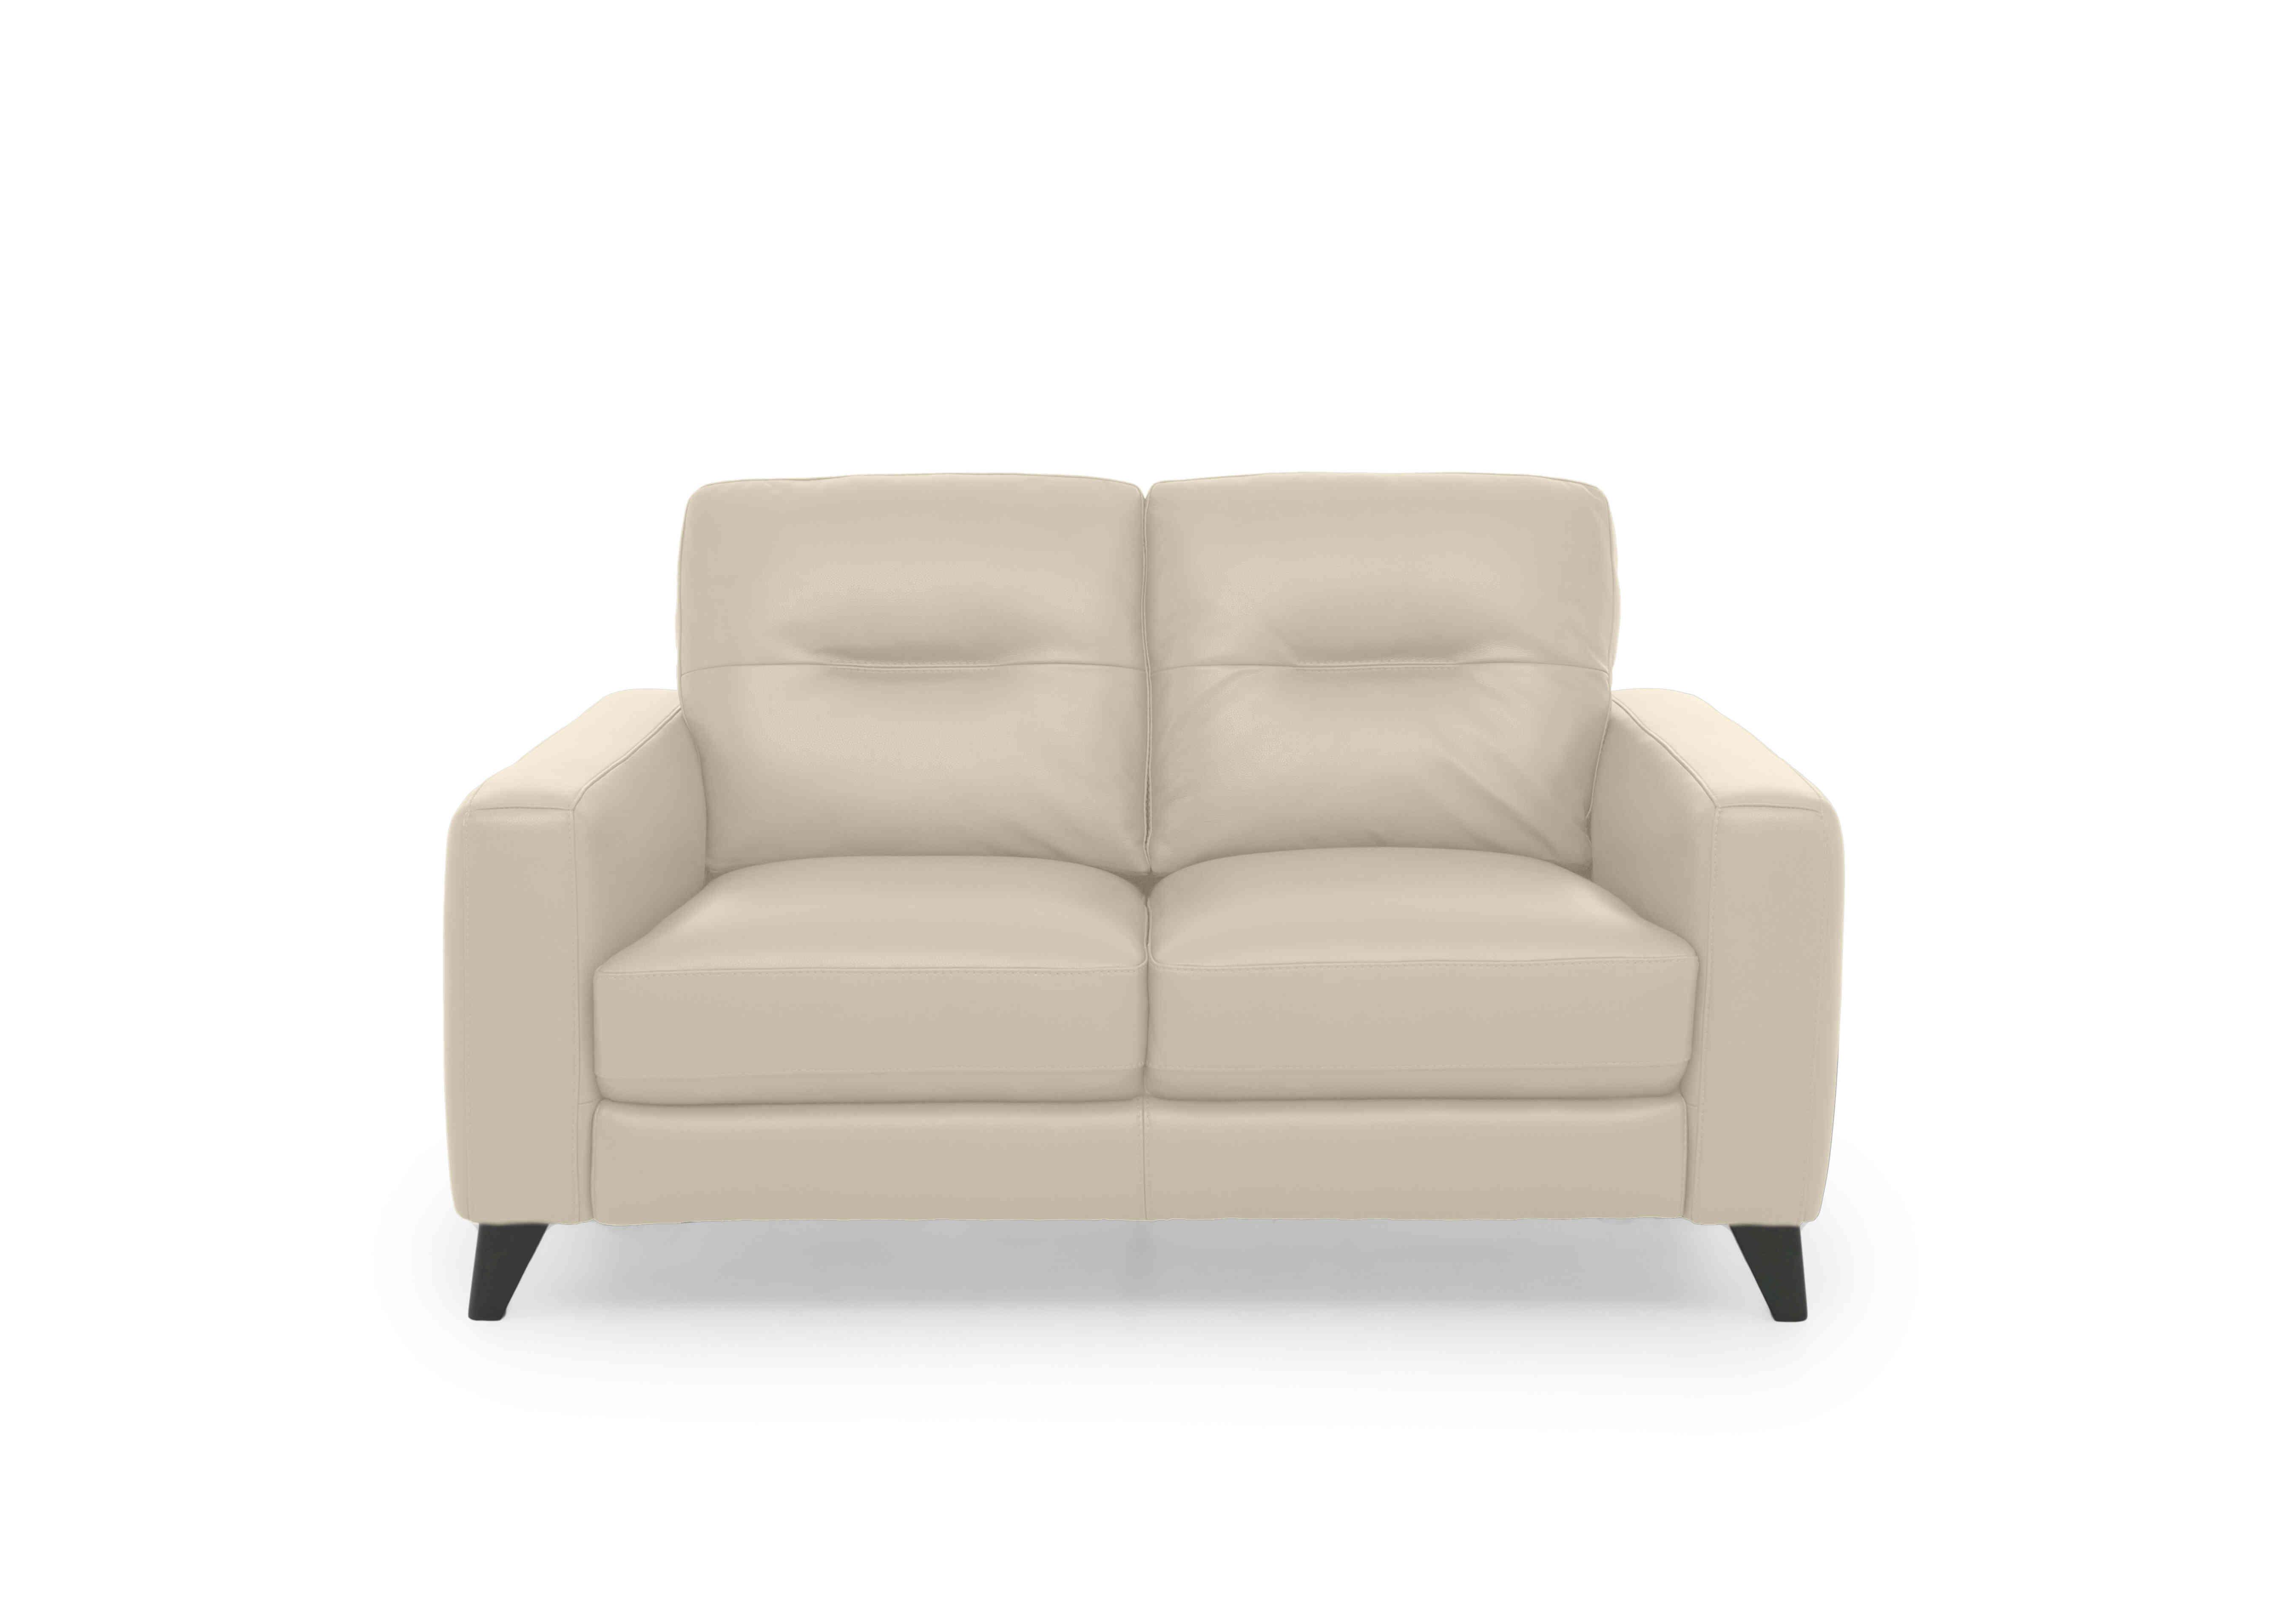 Jules 2 Seater Leather Sofa in Bv-862c Bisque on Furniture Village